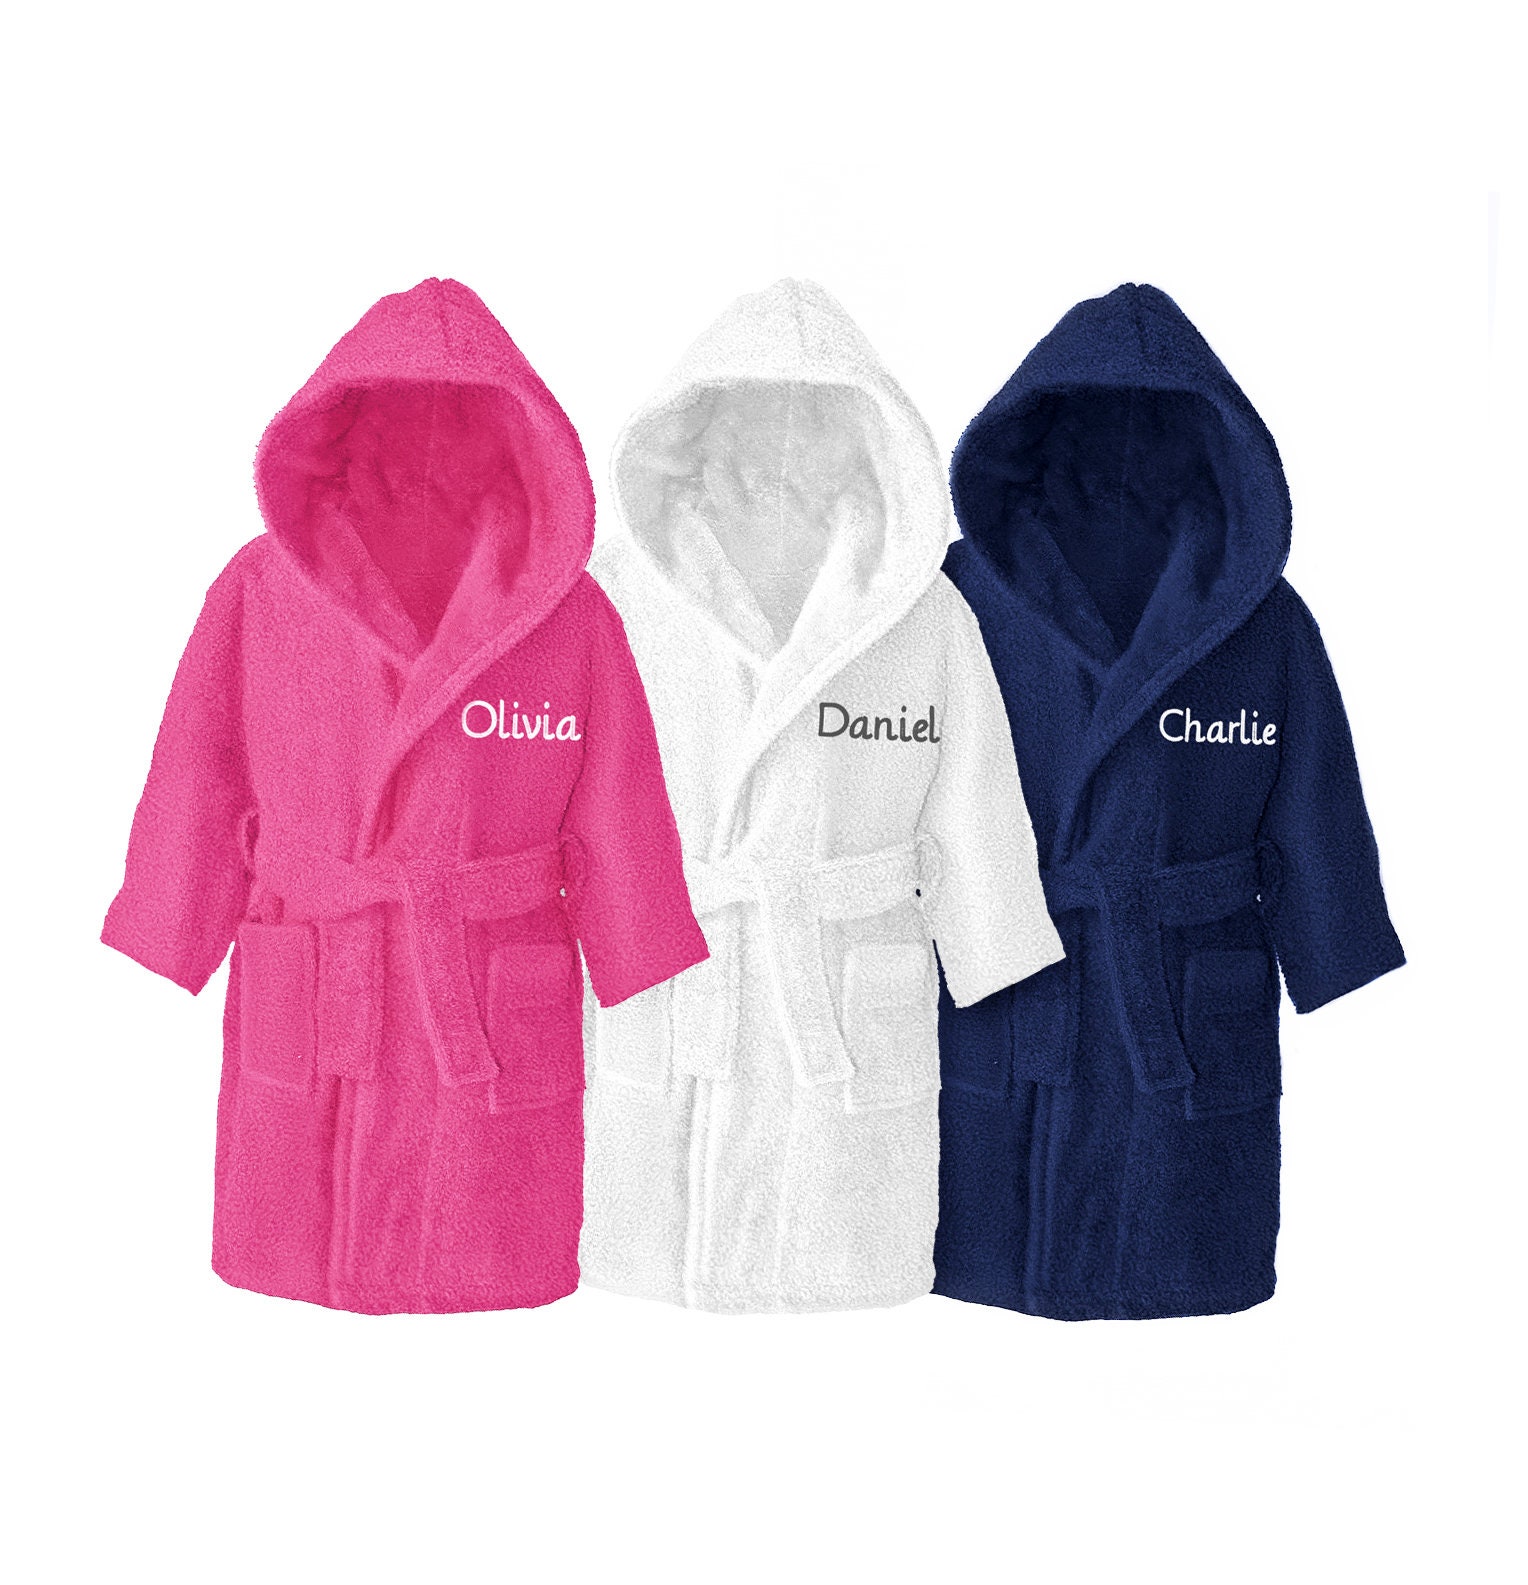 Personalised Unisex Kids Cotton Terry Towelling Dressing Gown Bath Robes Hooded 